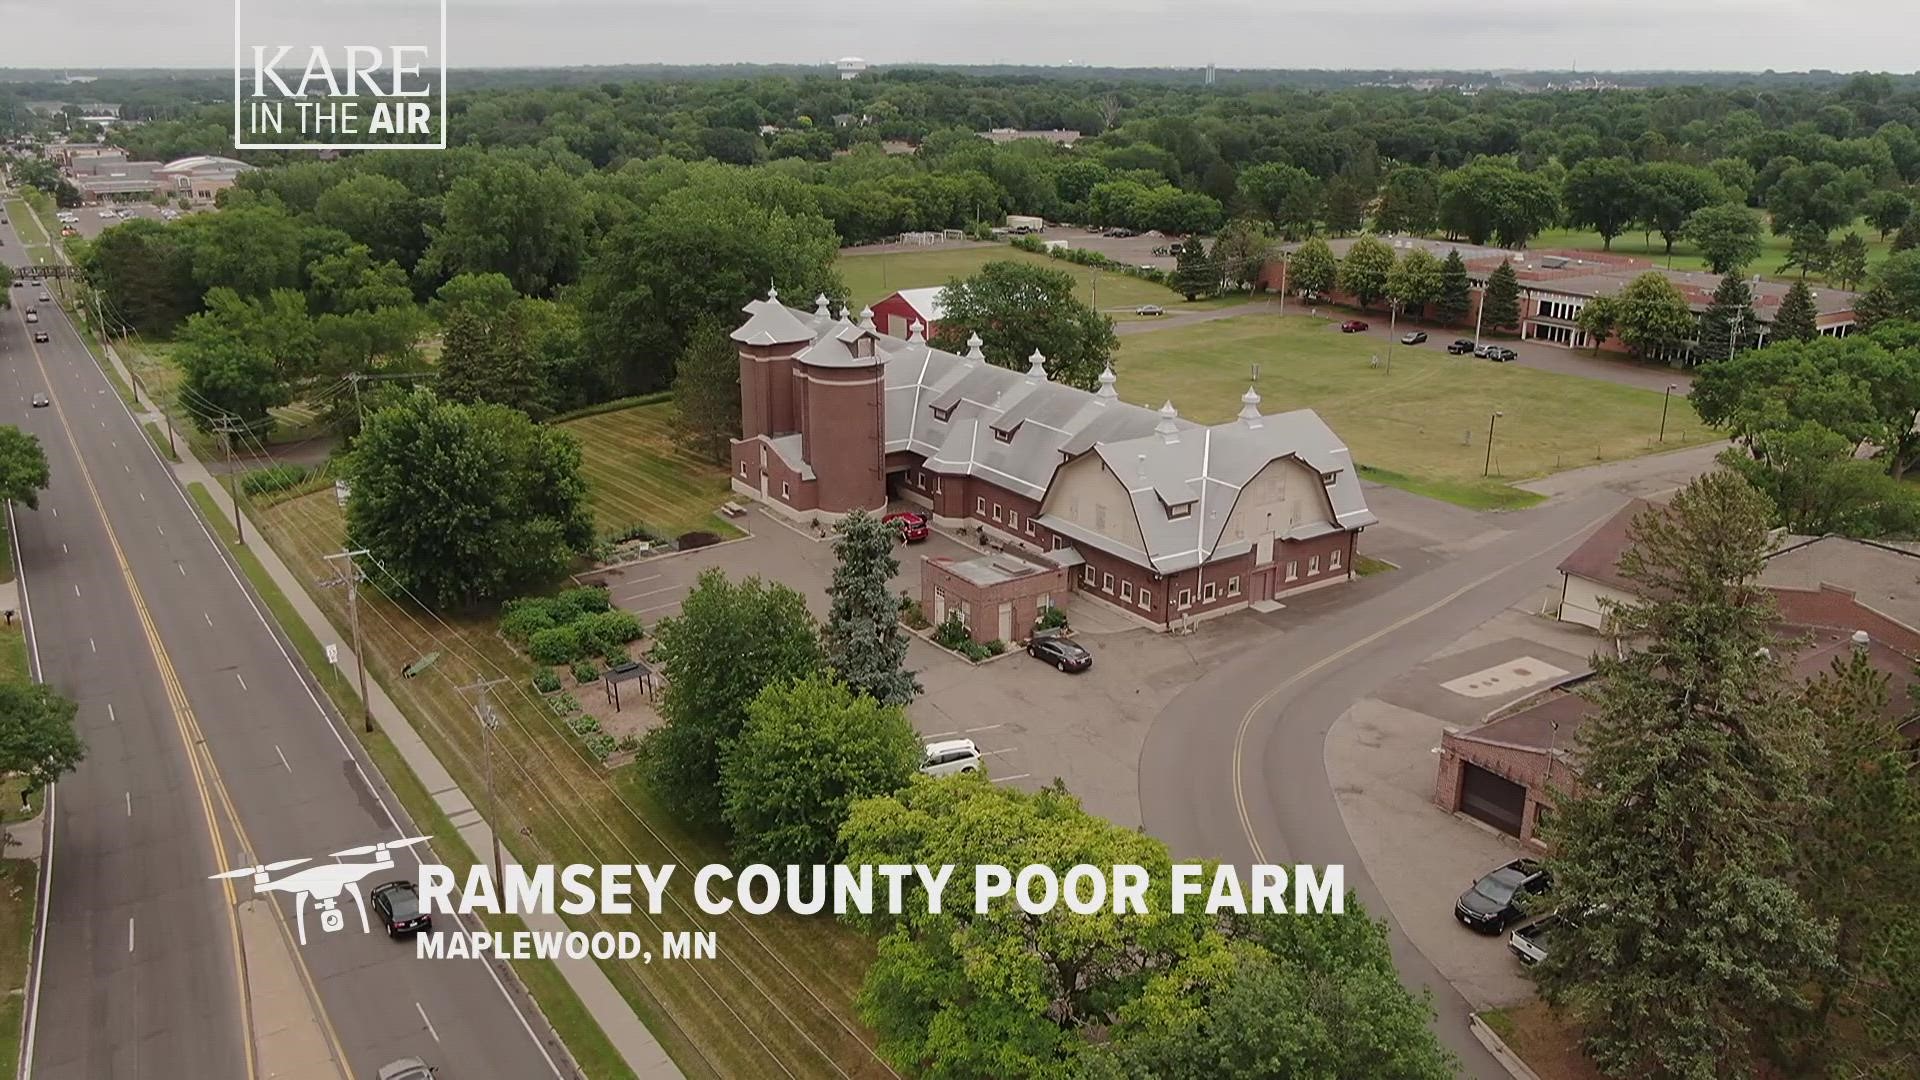 Our summer barnstorming drone tour continues with a flight over a majestic brick barn in Maplewood with an unconventional history.